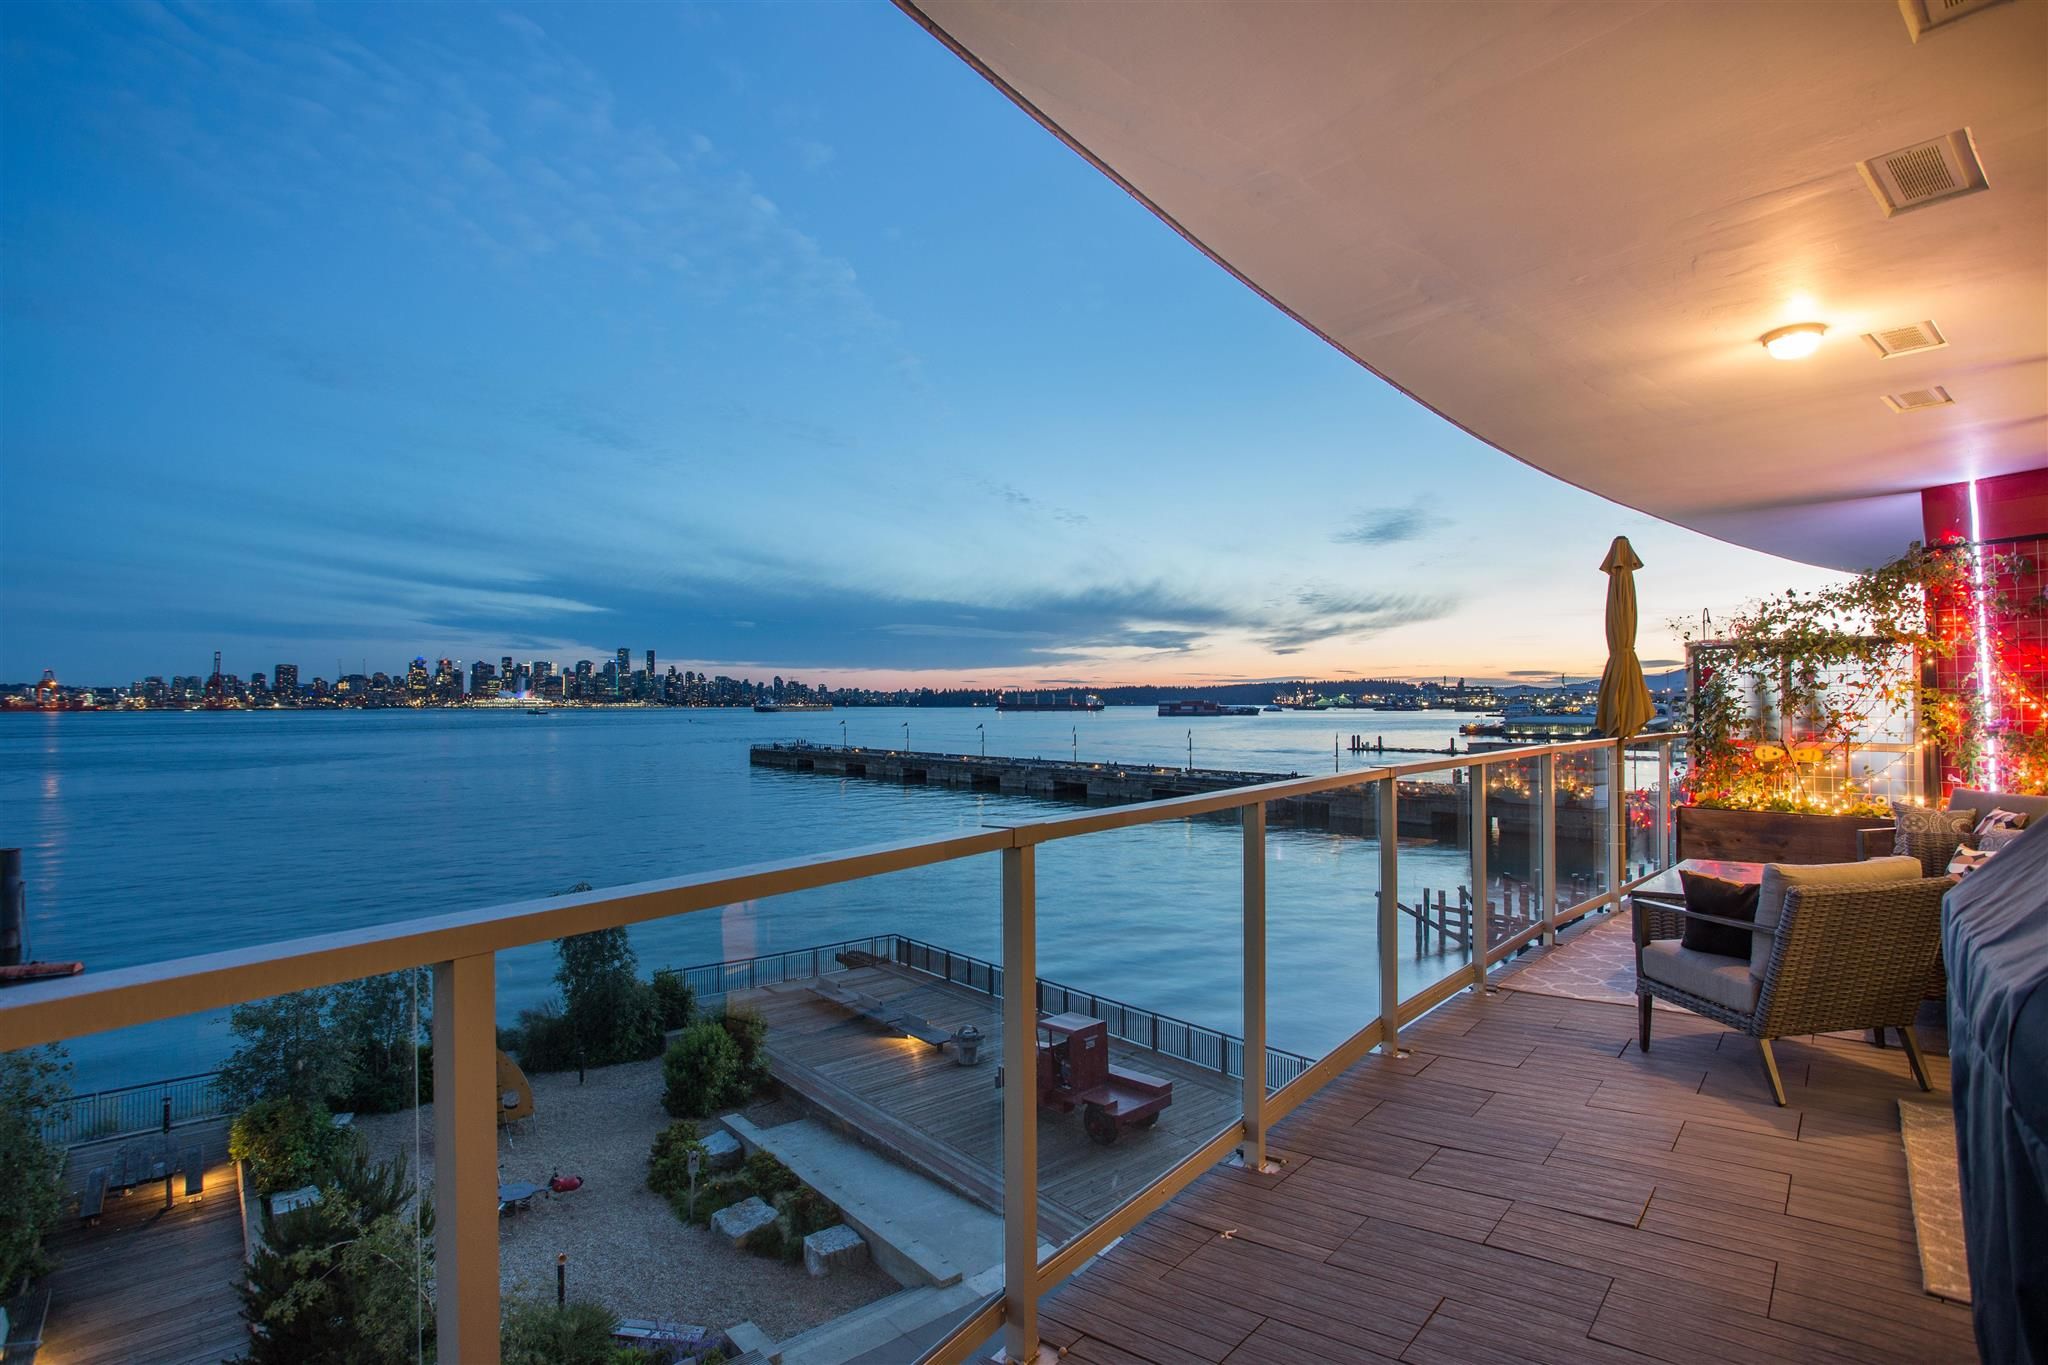 Photo 2: Photos: 301 185 VICTORY SHIP WAY in North Vancouver: Lower Lonsdale Condo for sale : MLS®# R2640901